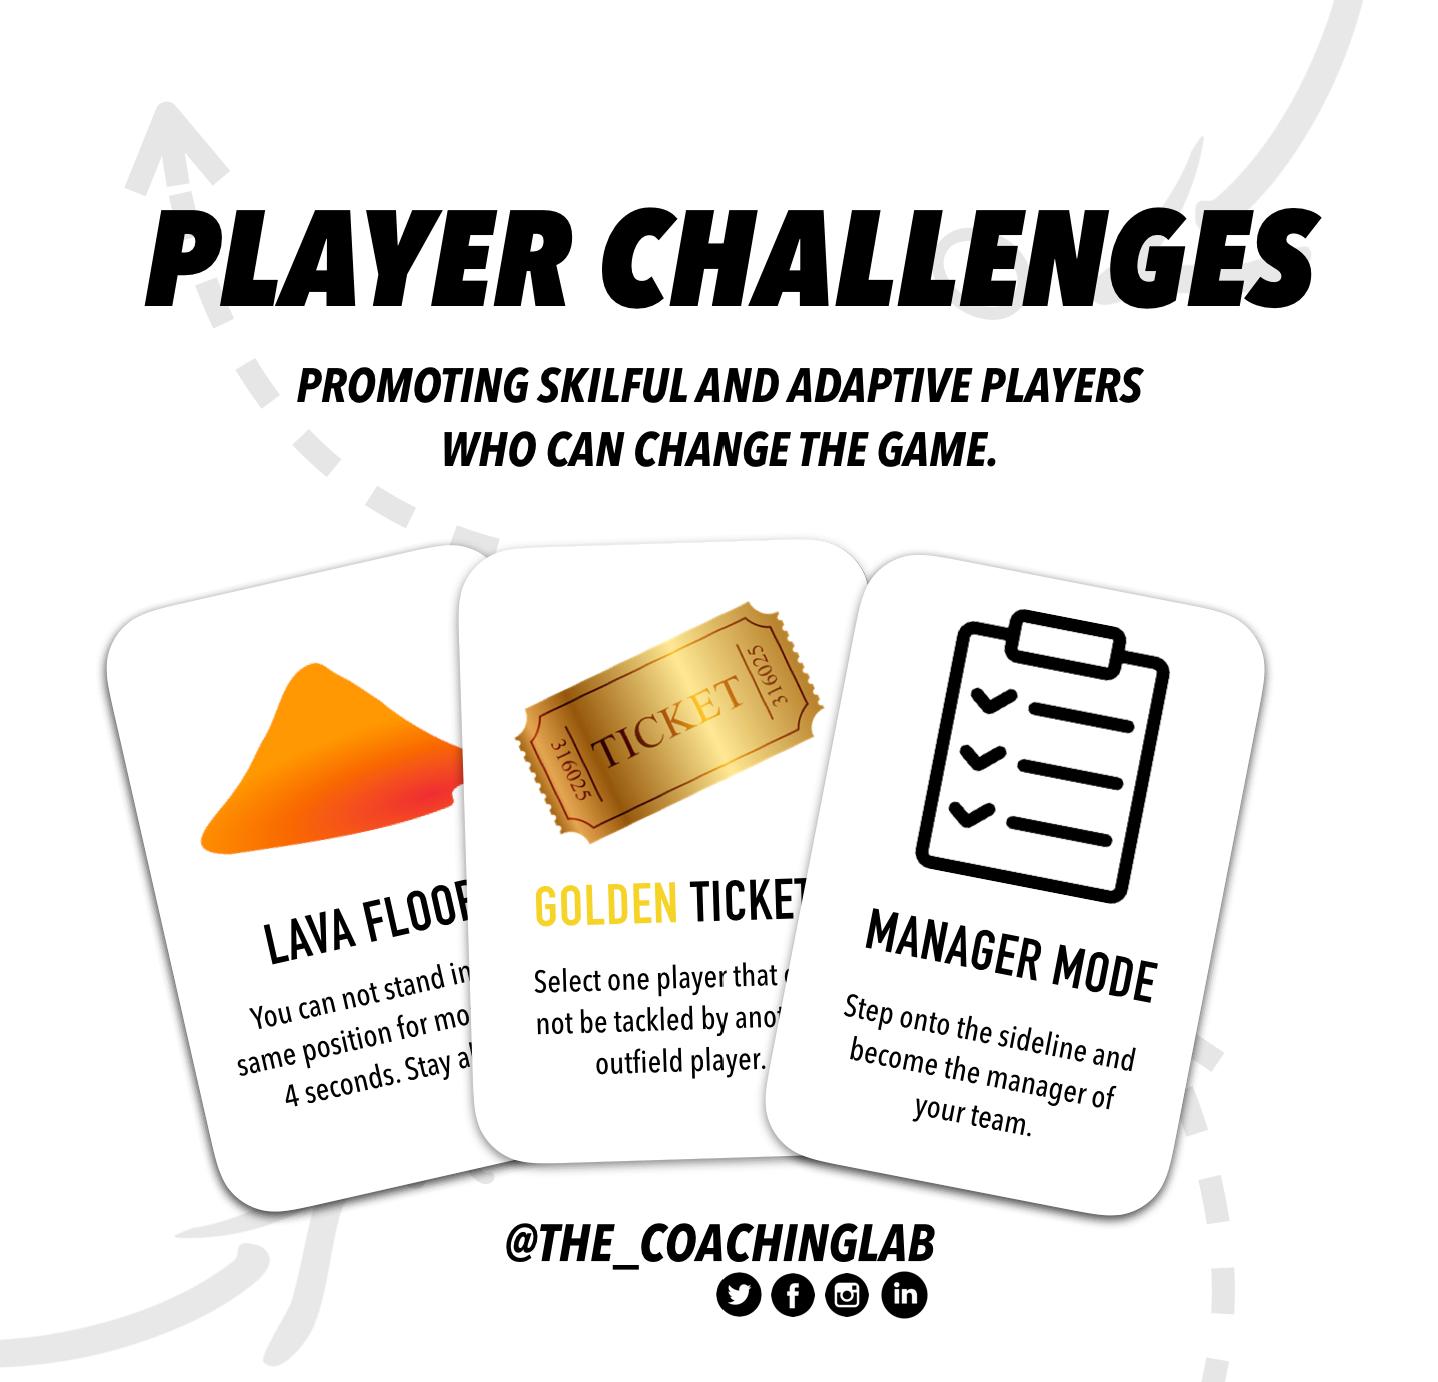 MatchPlay Cards - The Coaching Lab